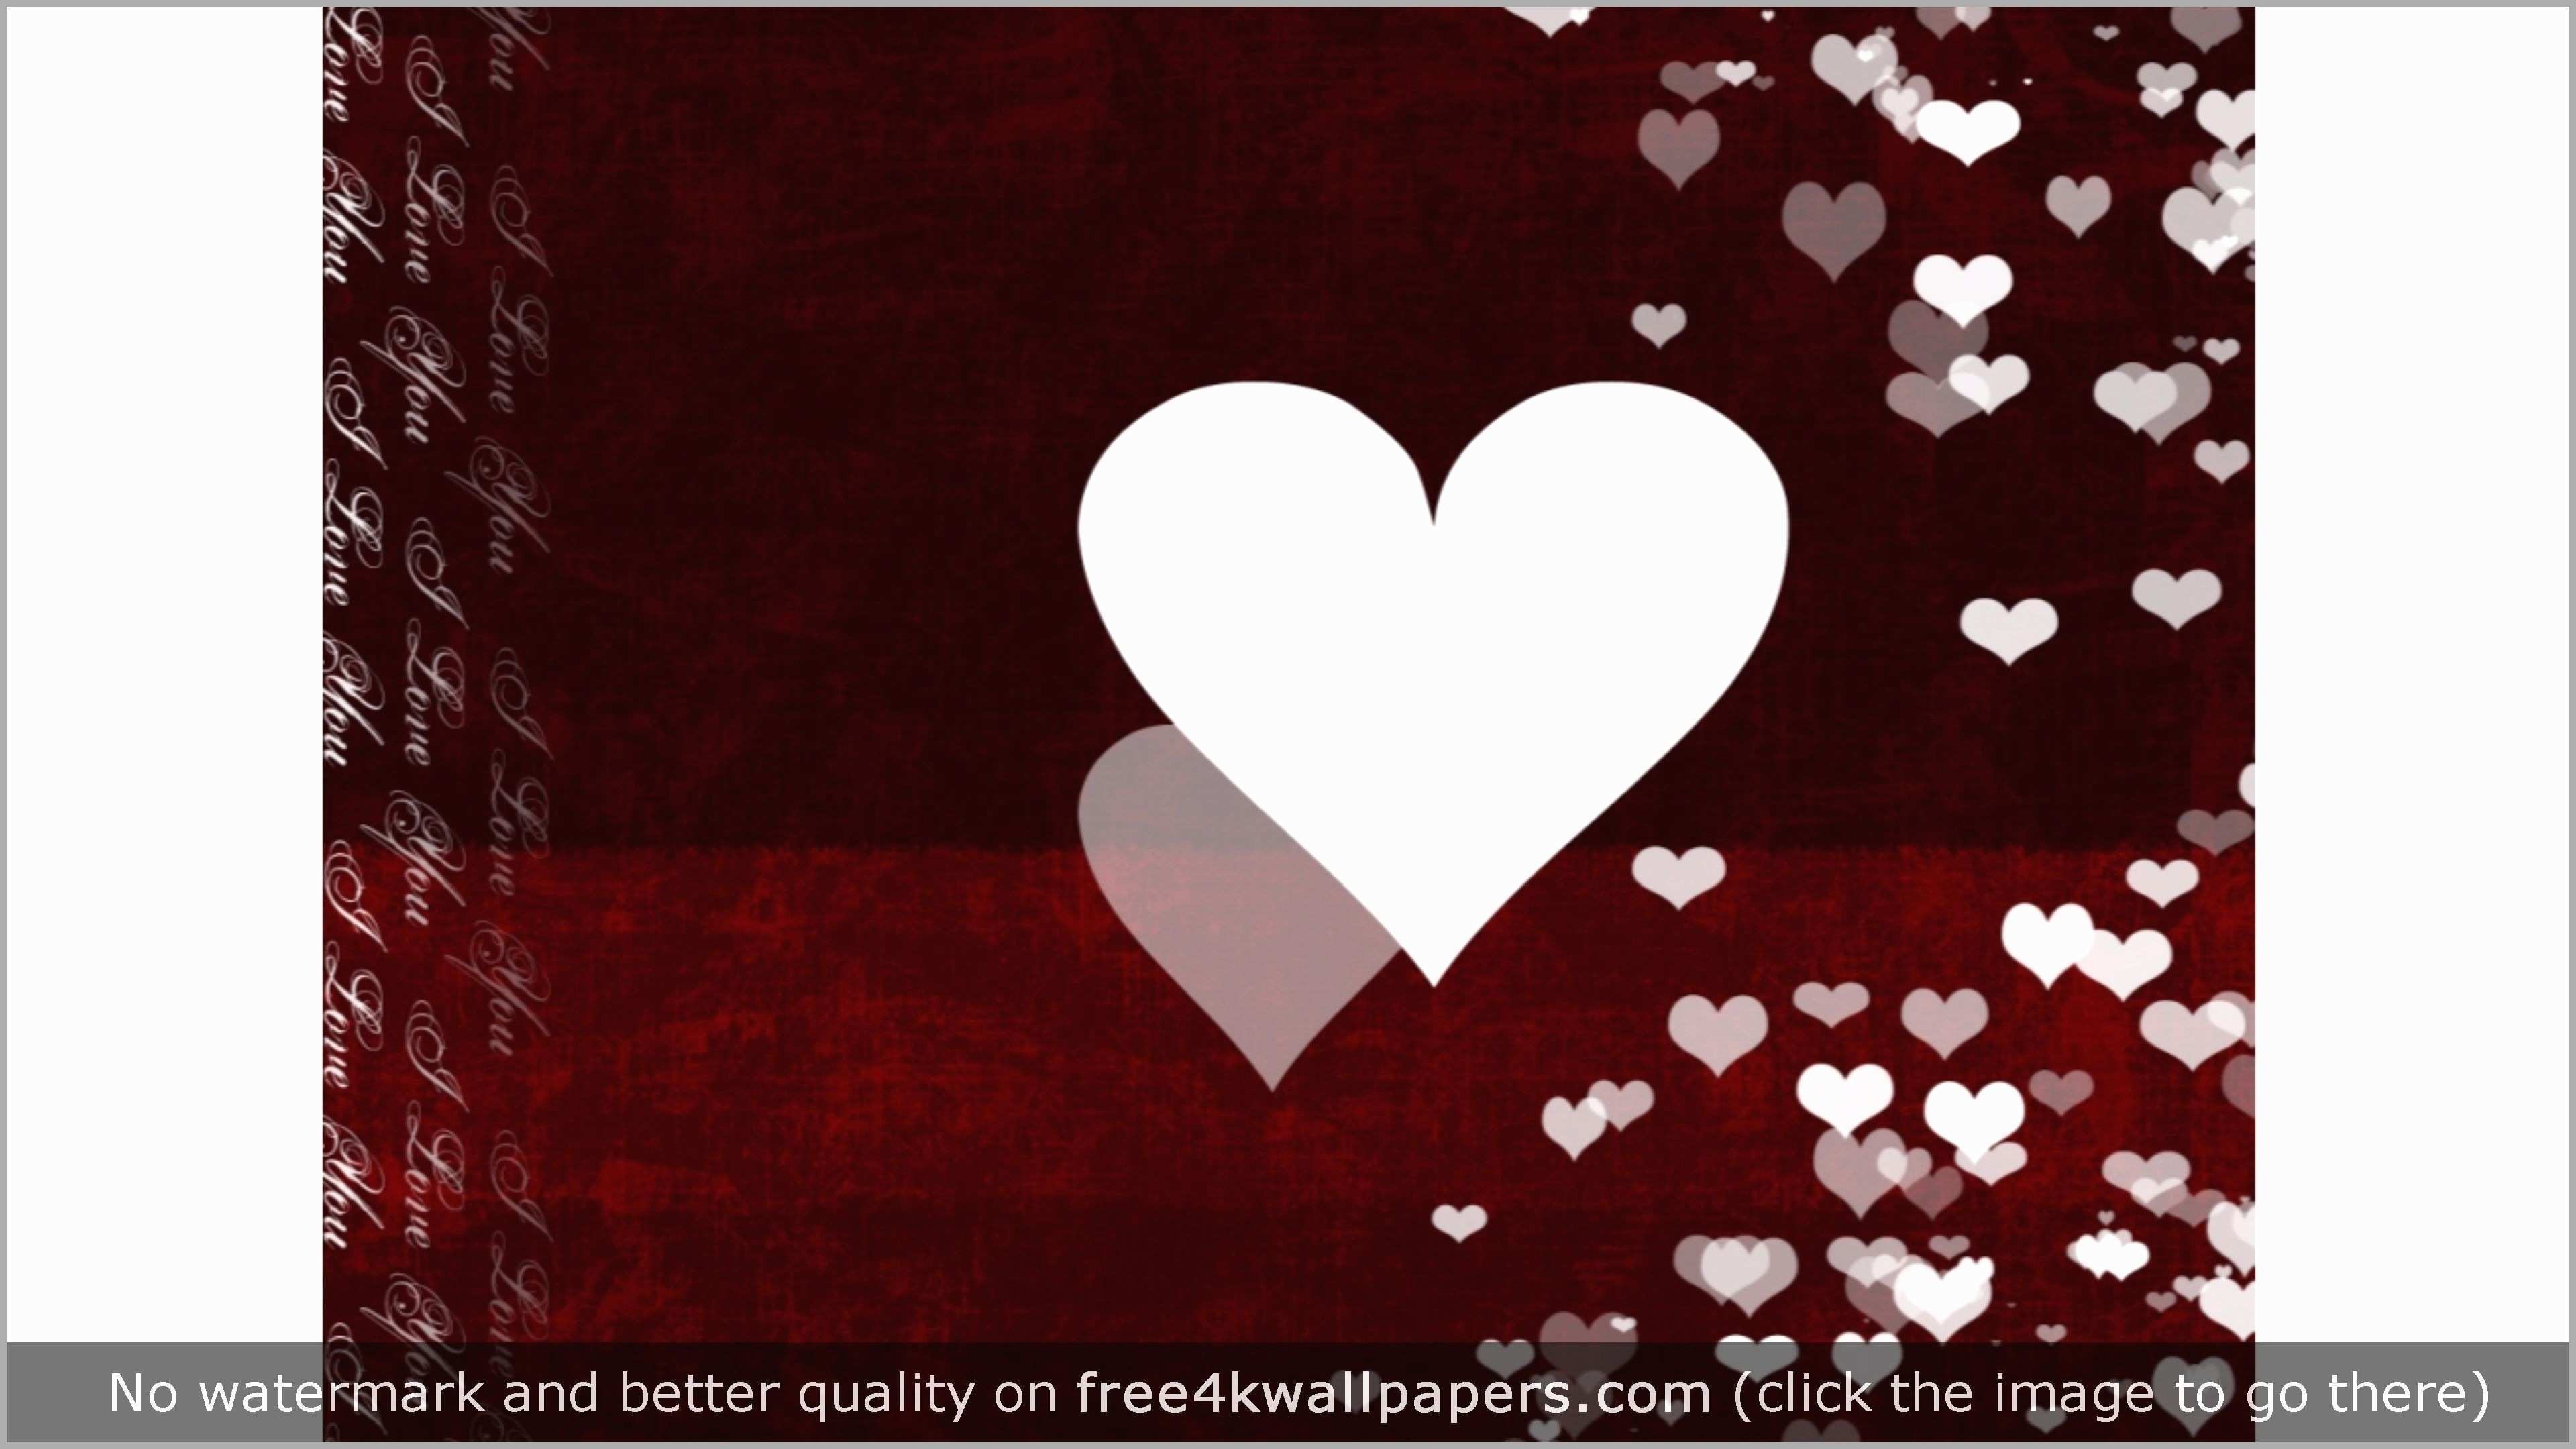 3840x2160 Love Wallpaper theme Unique Hearts Wallpapers Free Beautiful Car Image  White New Wallpaper Hd